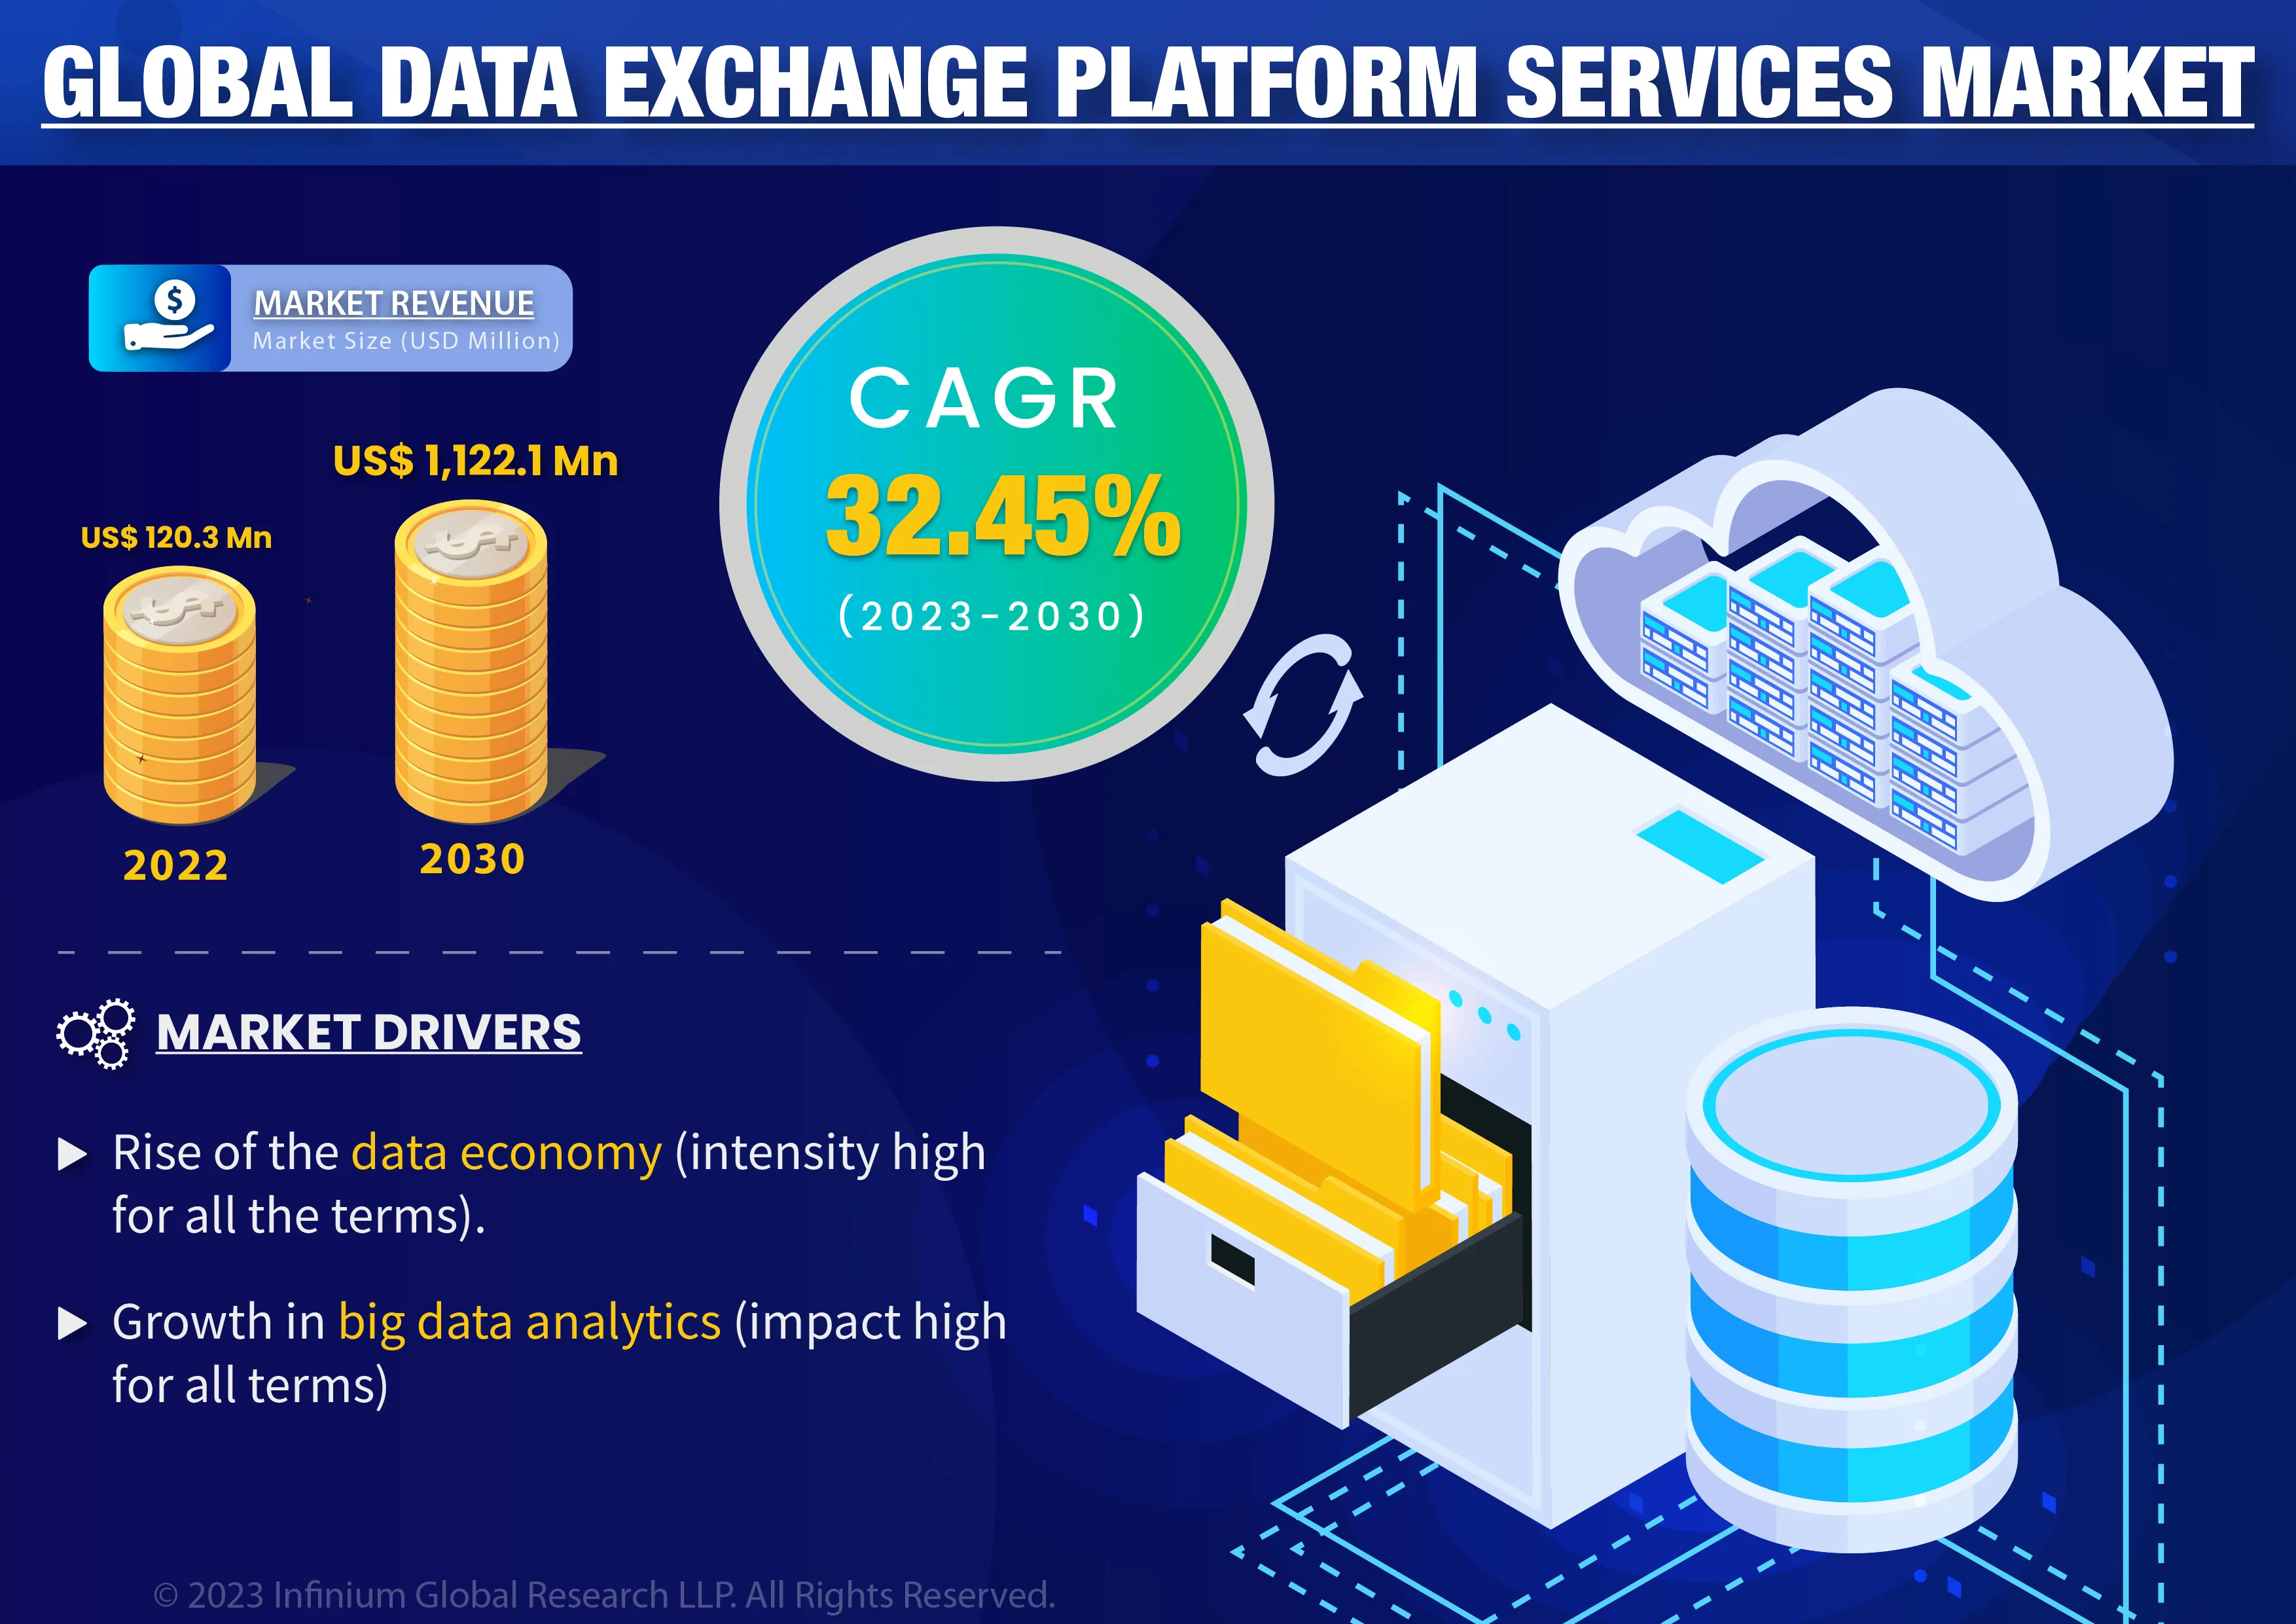 Global Data Exchange Platform Services Market Was Valued at USD 120.3 Million in 2022 and is Expected to Reach USD 1,122.1 Million by 2030 and Grow at a CAGR of 32.45% Over the Forecast Period